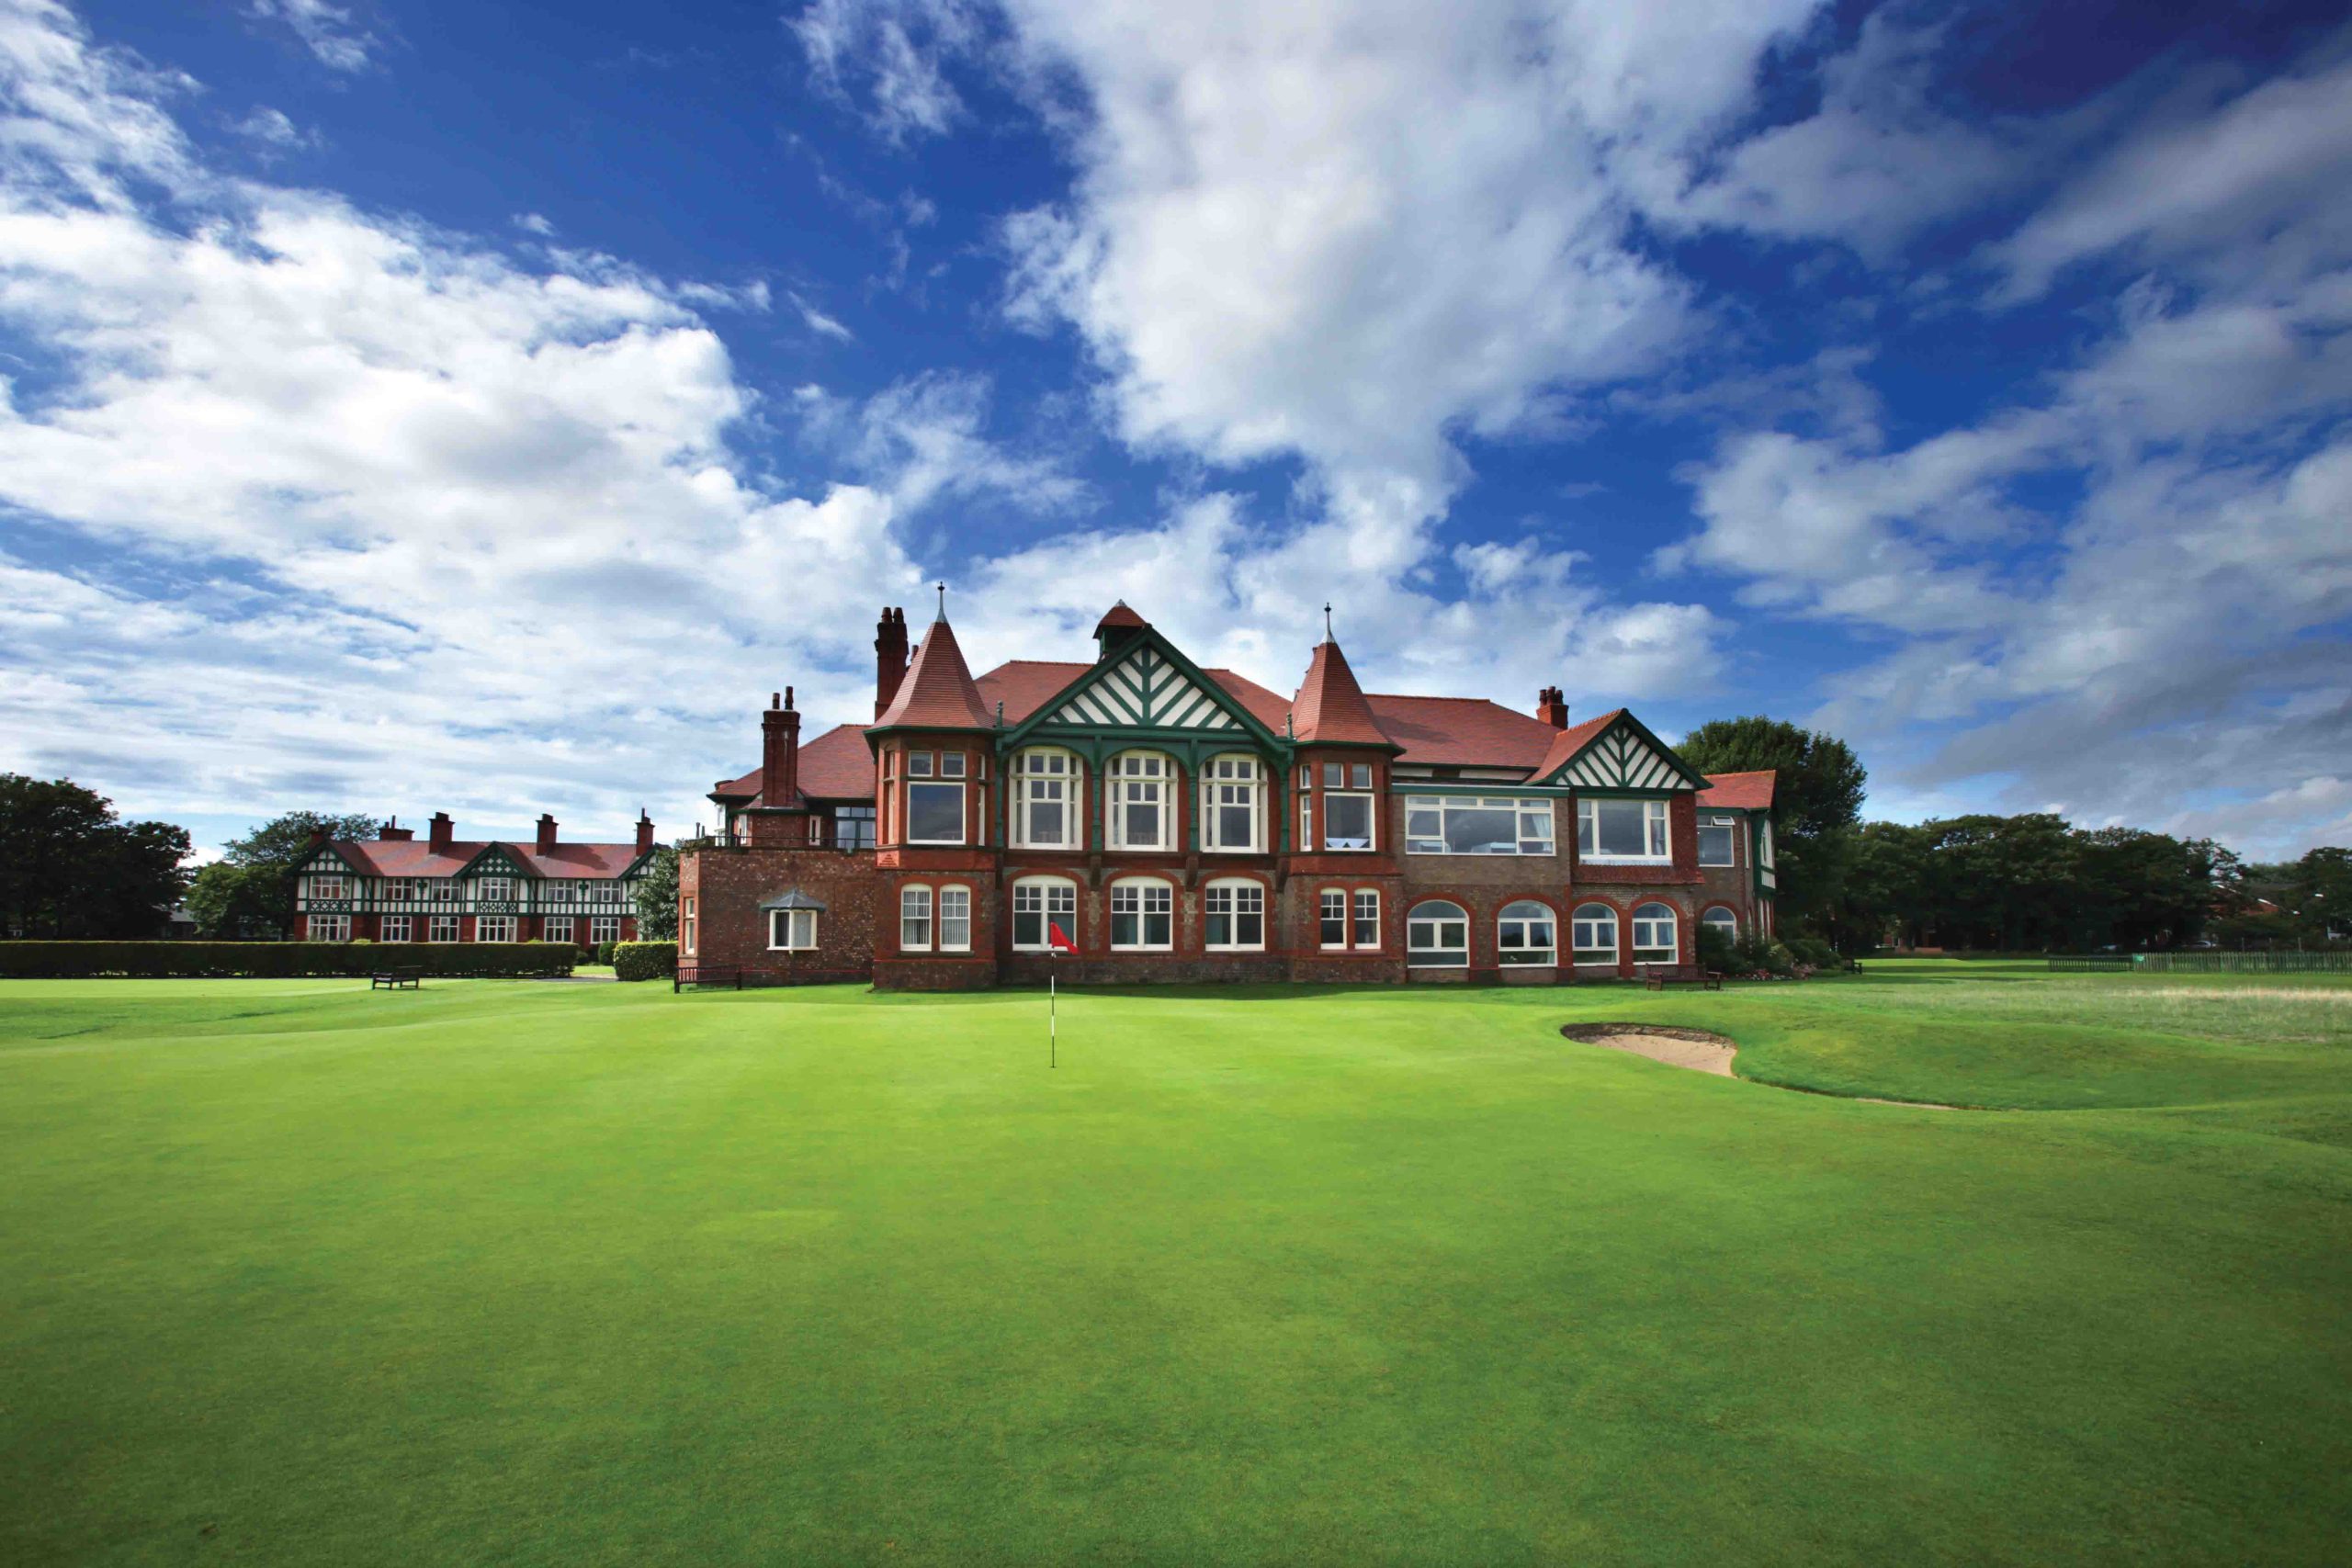 The Clubhouse at Royal Lytham St Annes